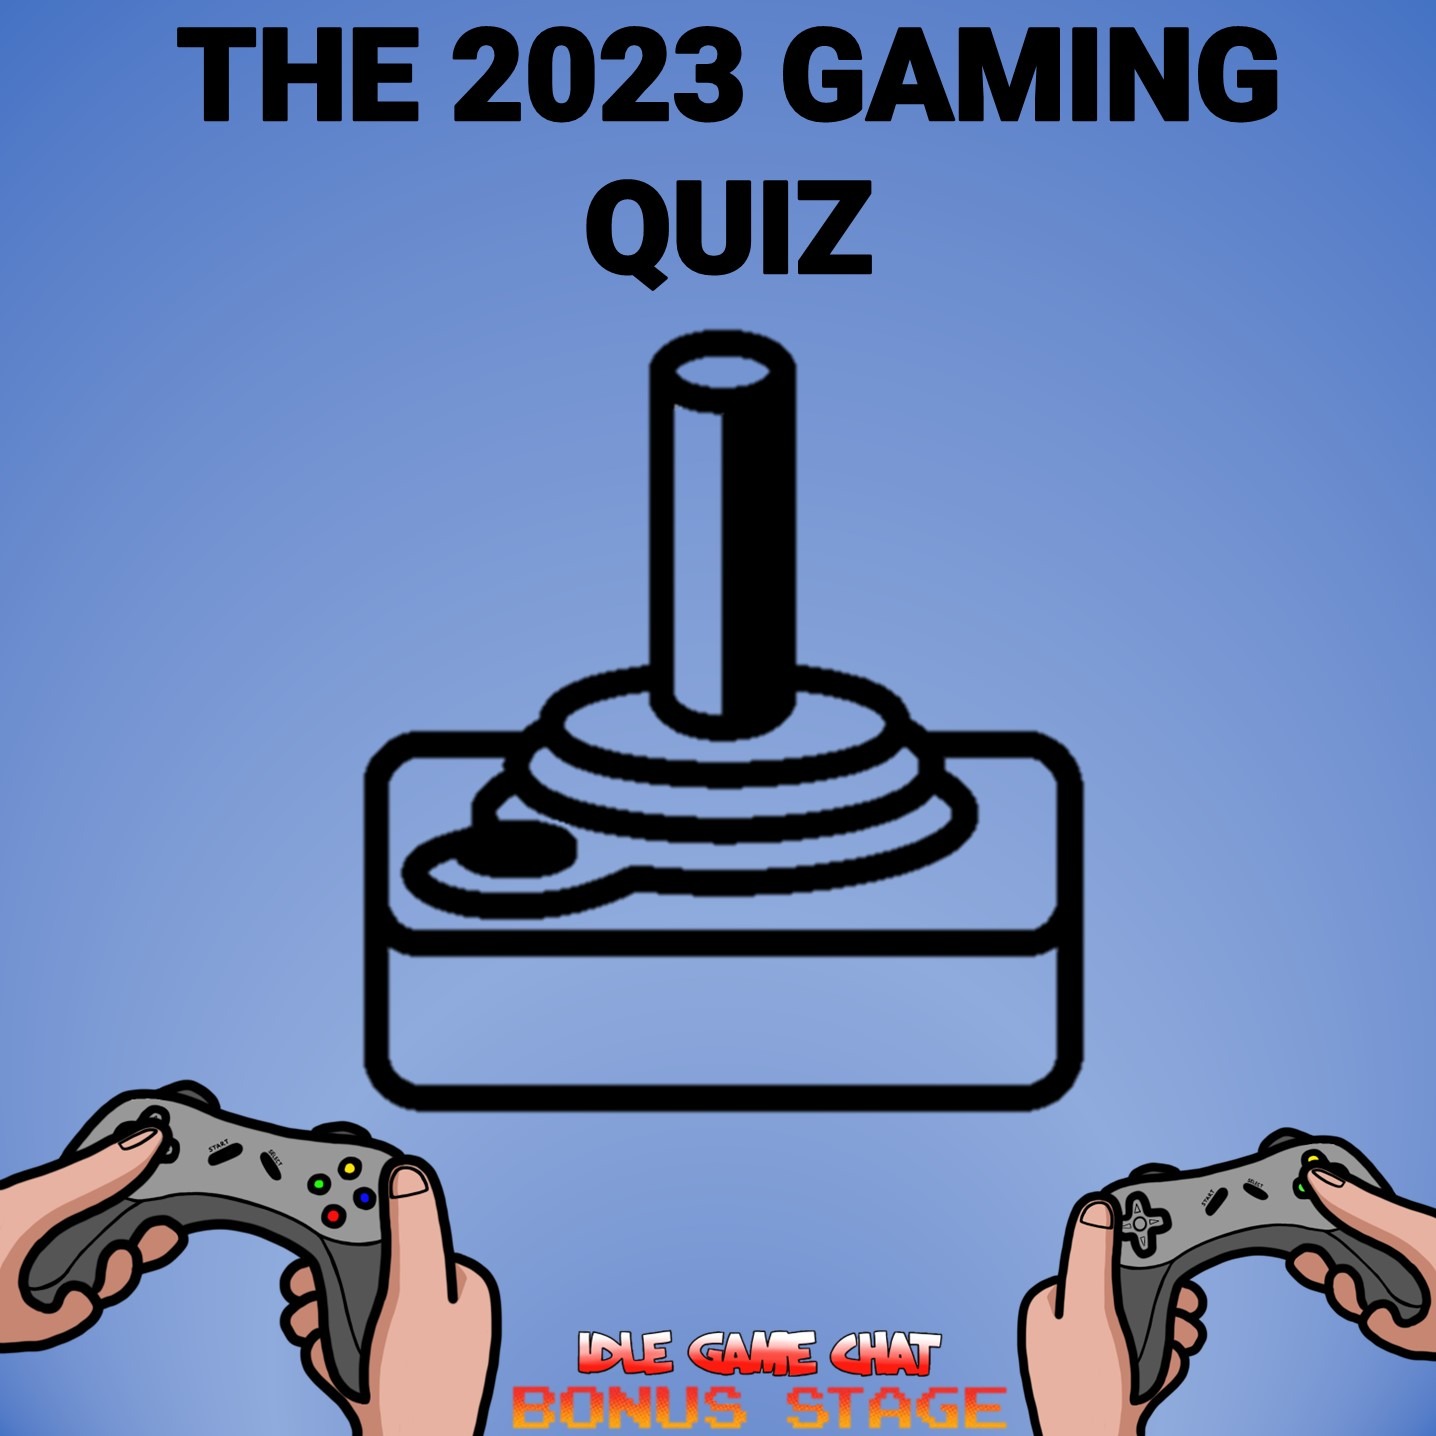 The 2023 Gaming Quiz | Idle Game Chat Bonus Stage